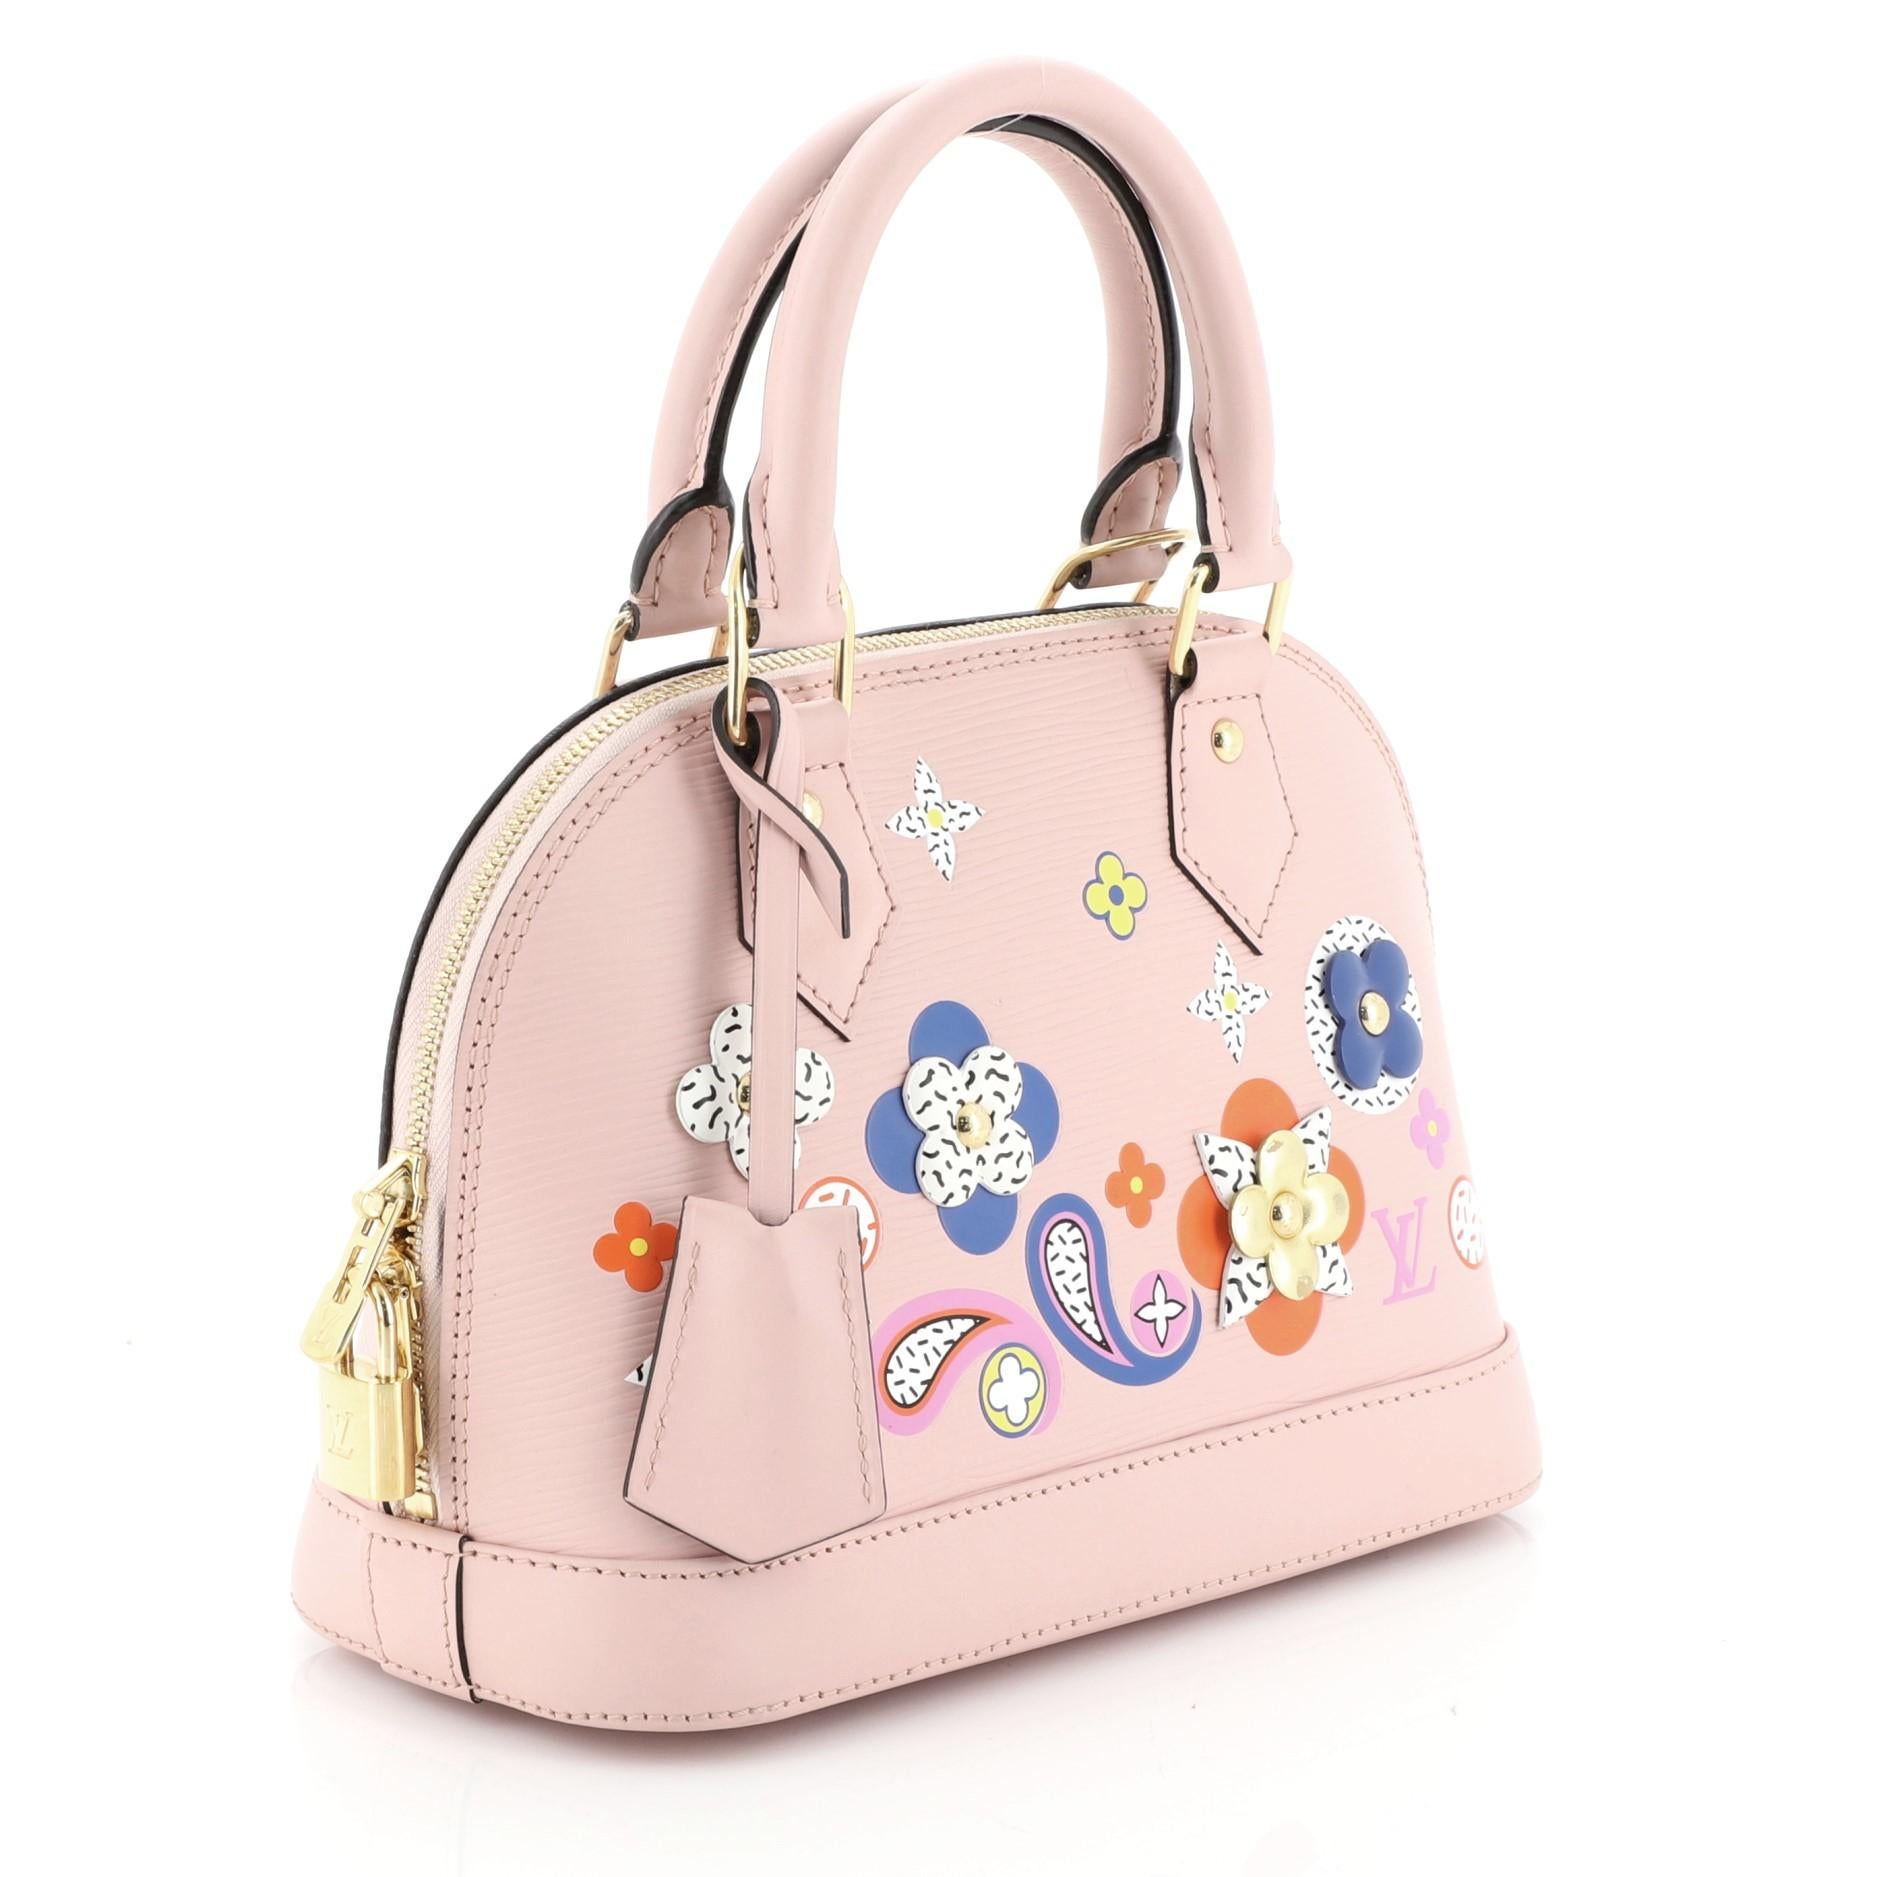 This Louis Vuitton Alma Handbag Limited Edition Floral Patchwork Epi Leather BB, crafted in pink epi leather, features dual rolled handles, floral patchwork detailing and gold-tone hardware. Its zip-around closure opens to a pink microfiber interior